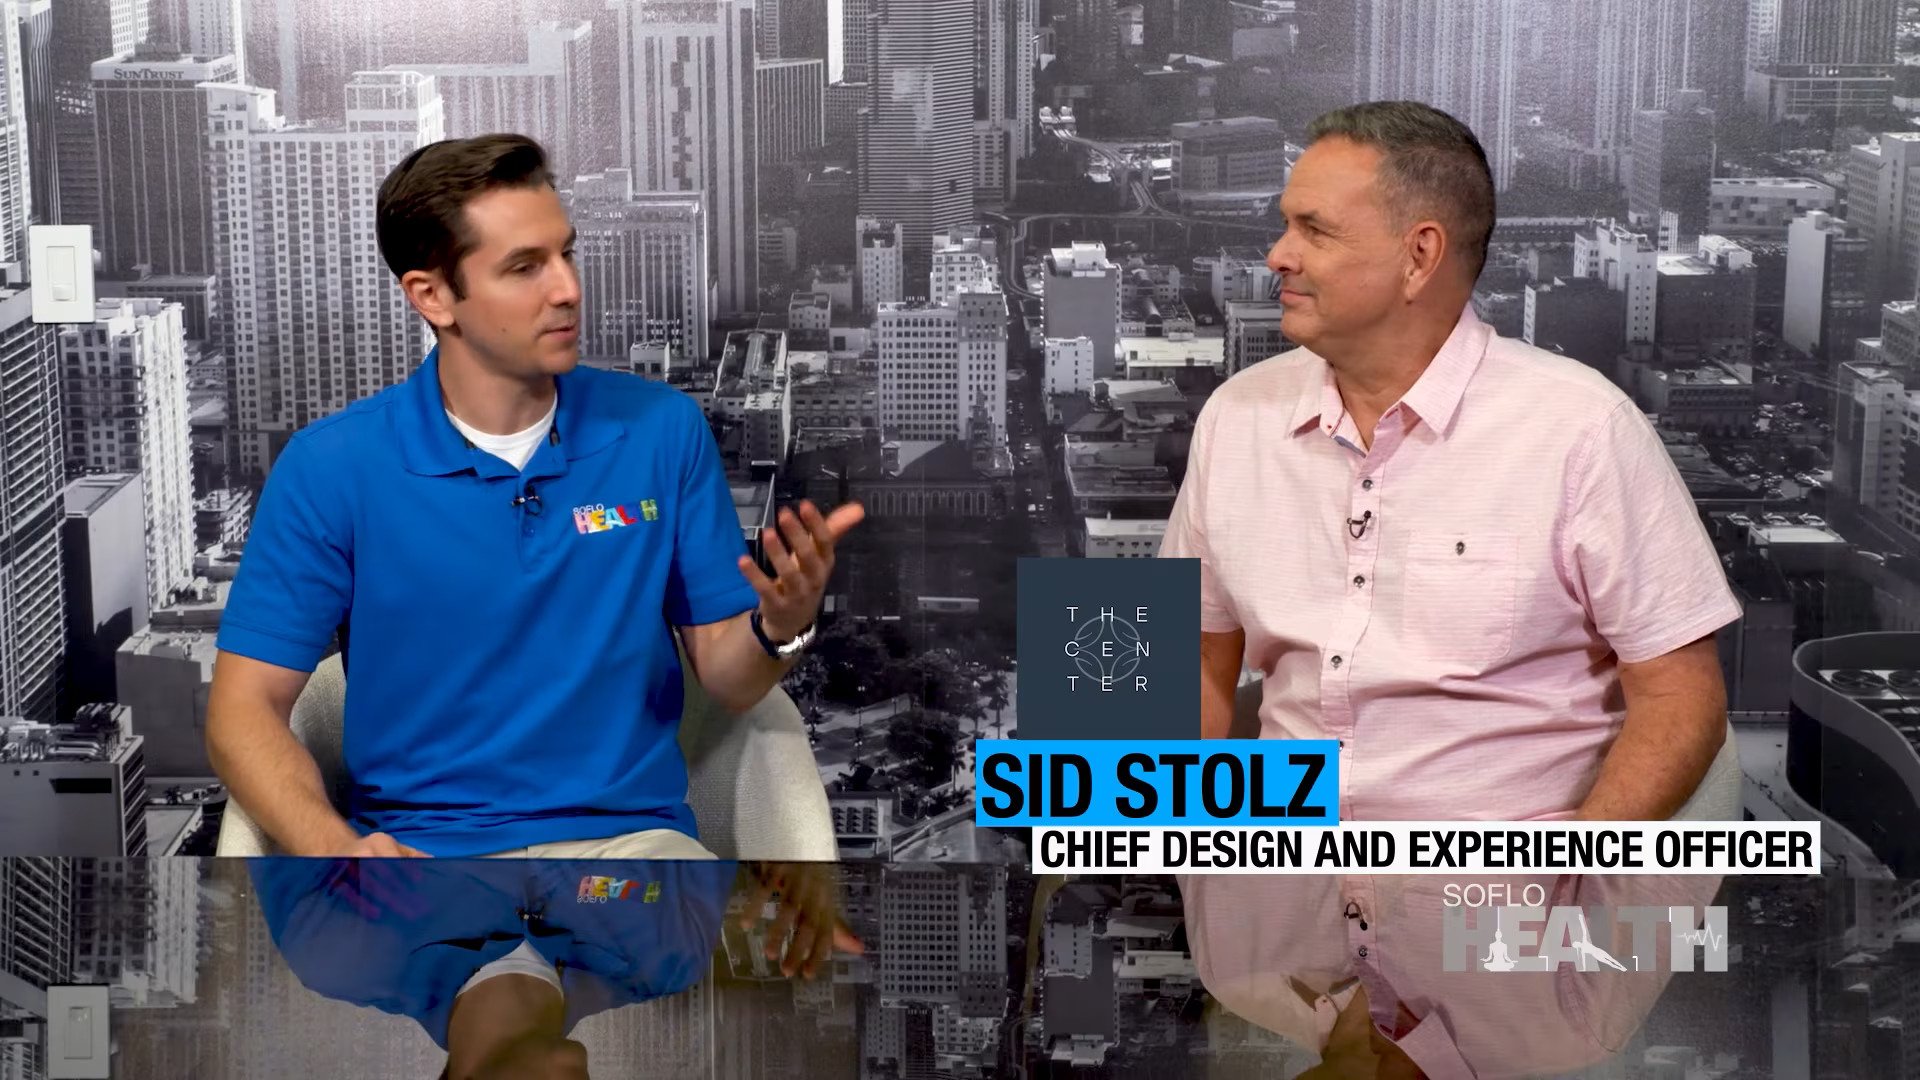 ABC TV SoFlo Health Part 2 with Sid Stolz from Blue Zones